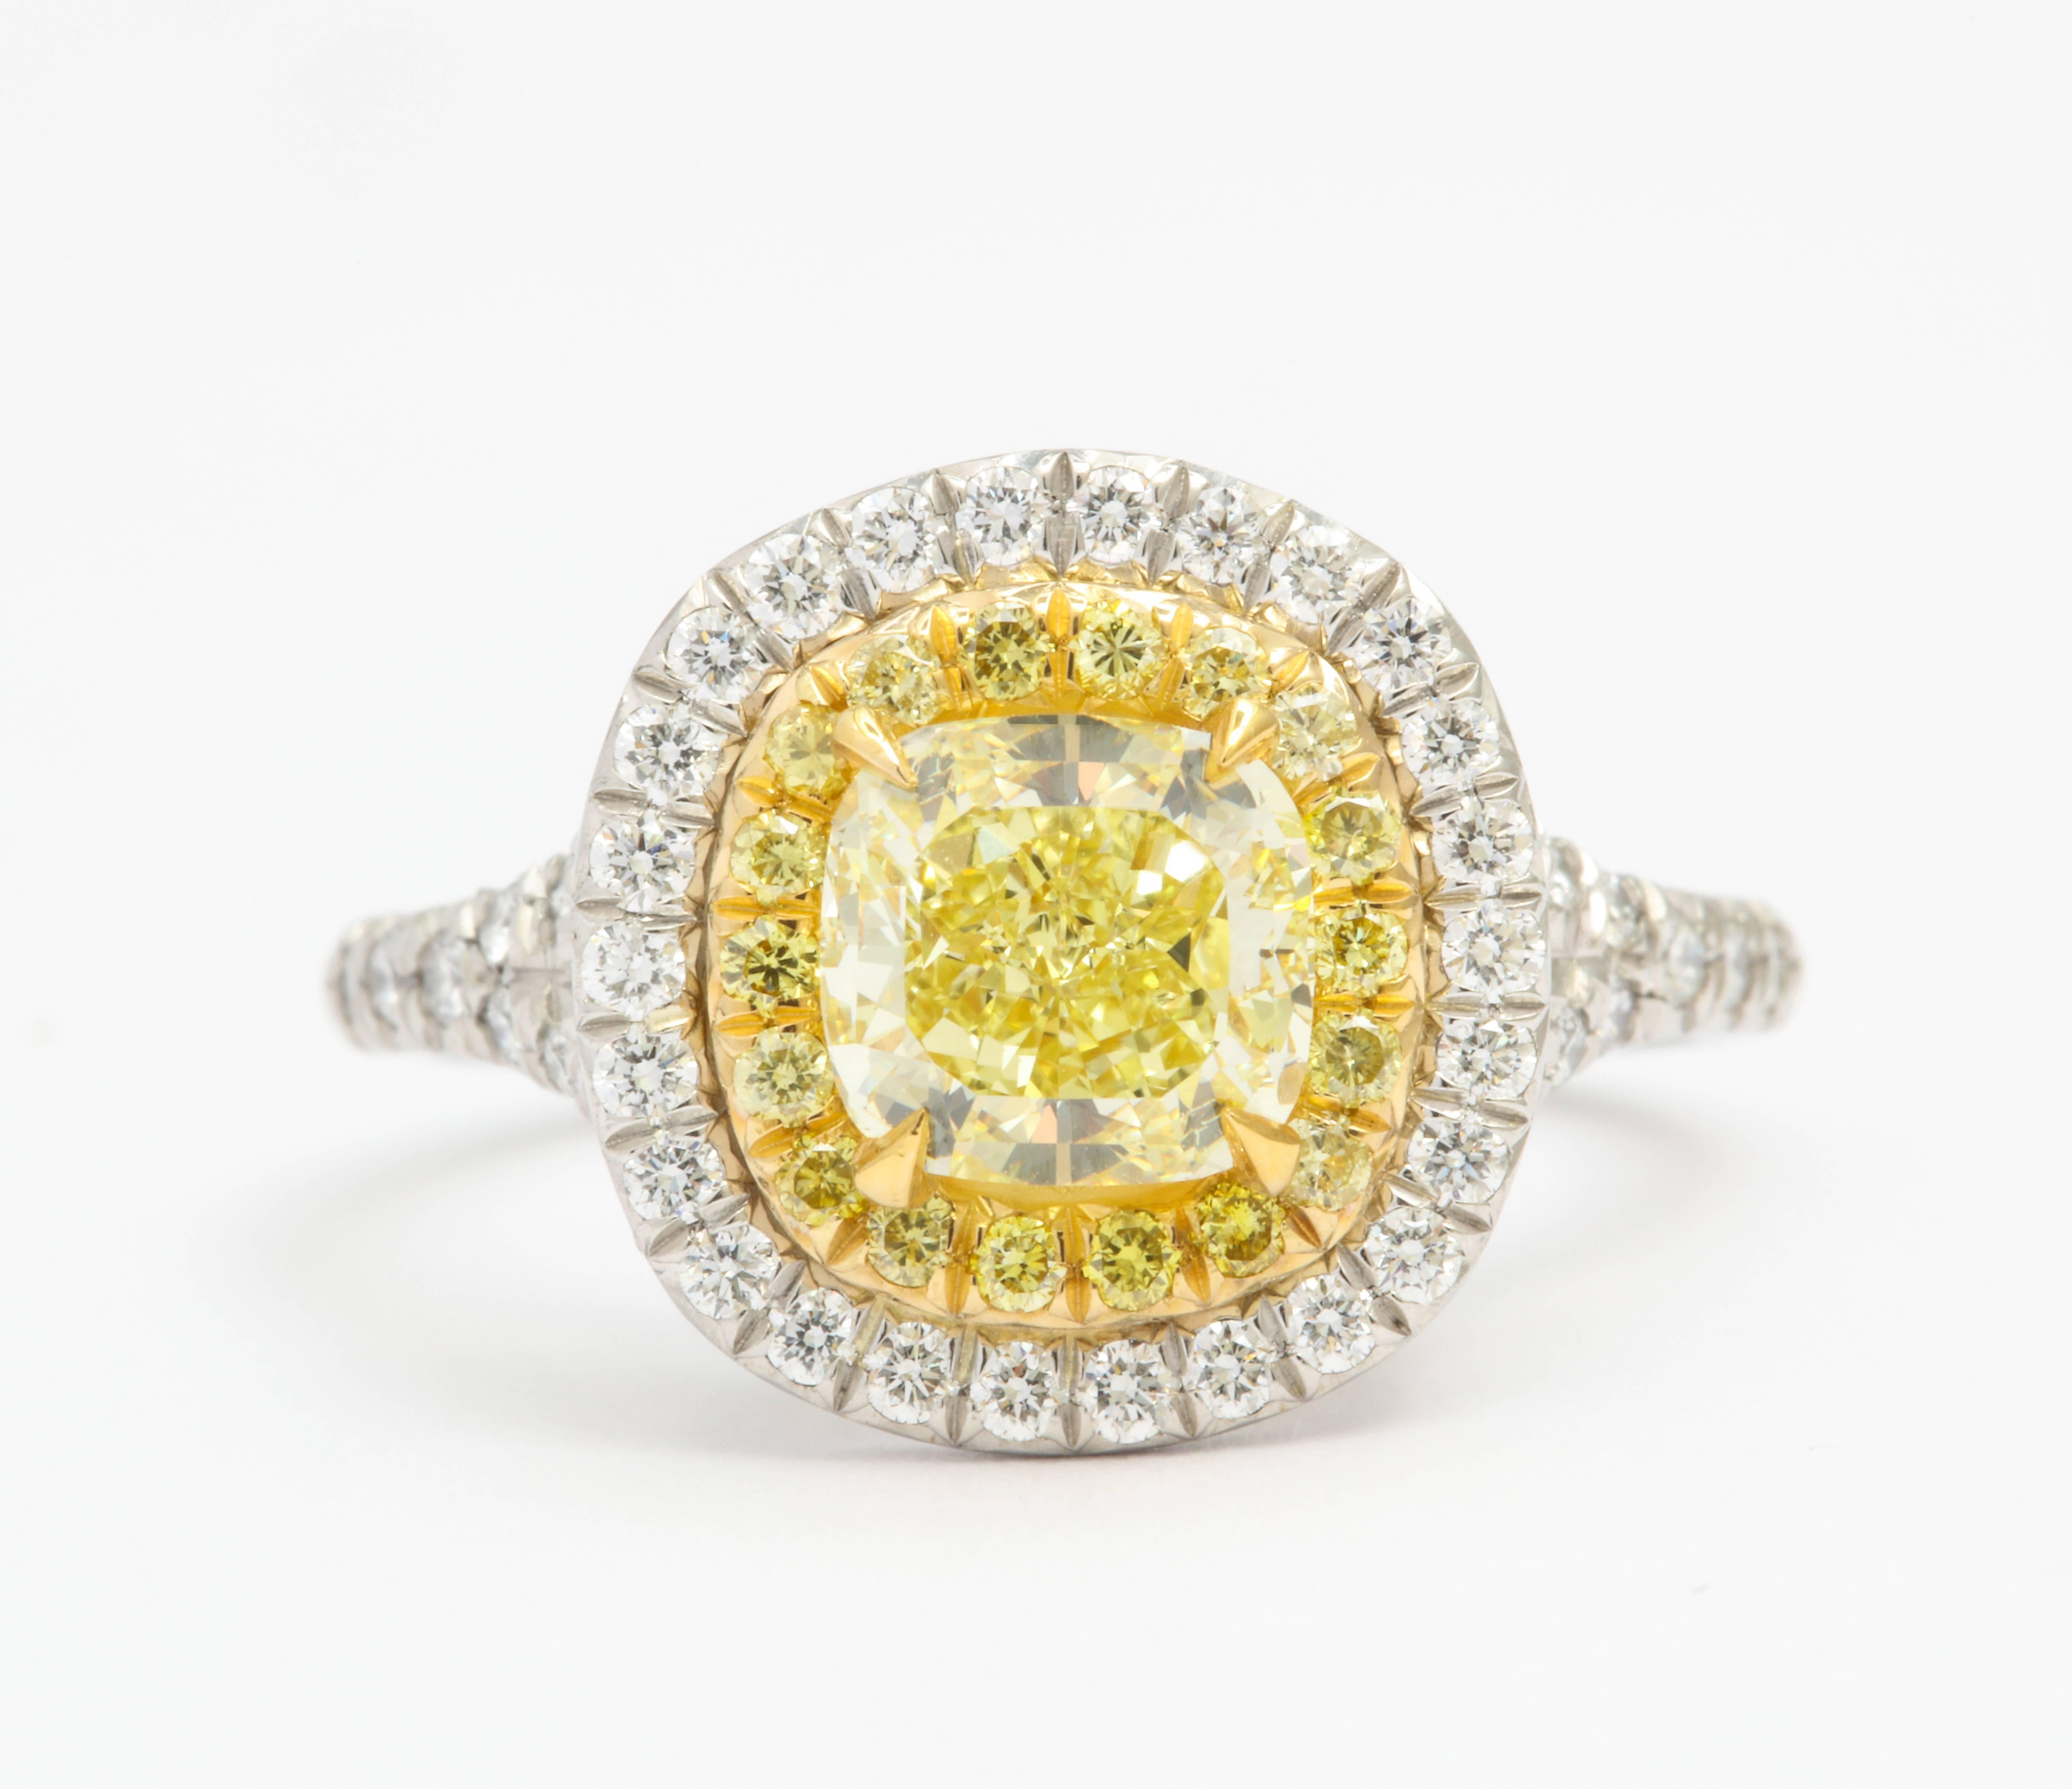 Contemporary GIA Certified Cushion Cut Intense Yellow Diamond Ring in Platinum 